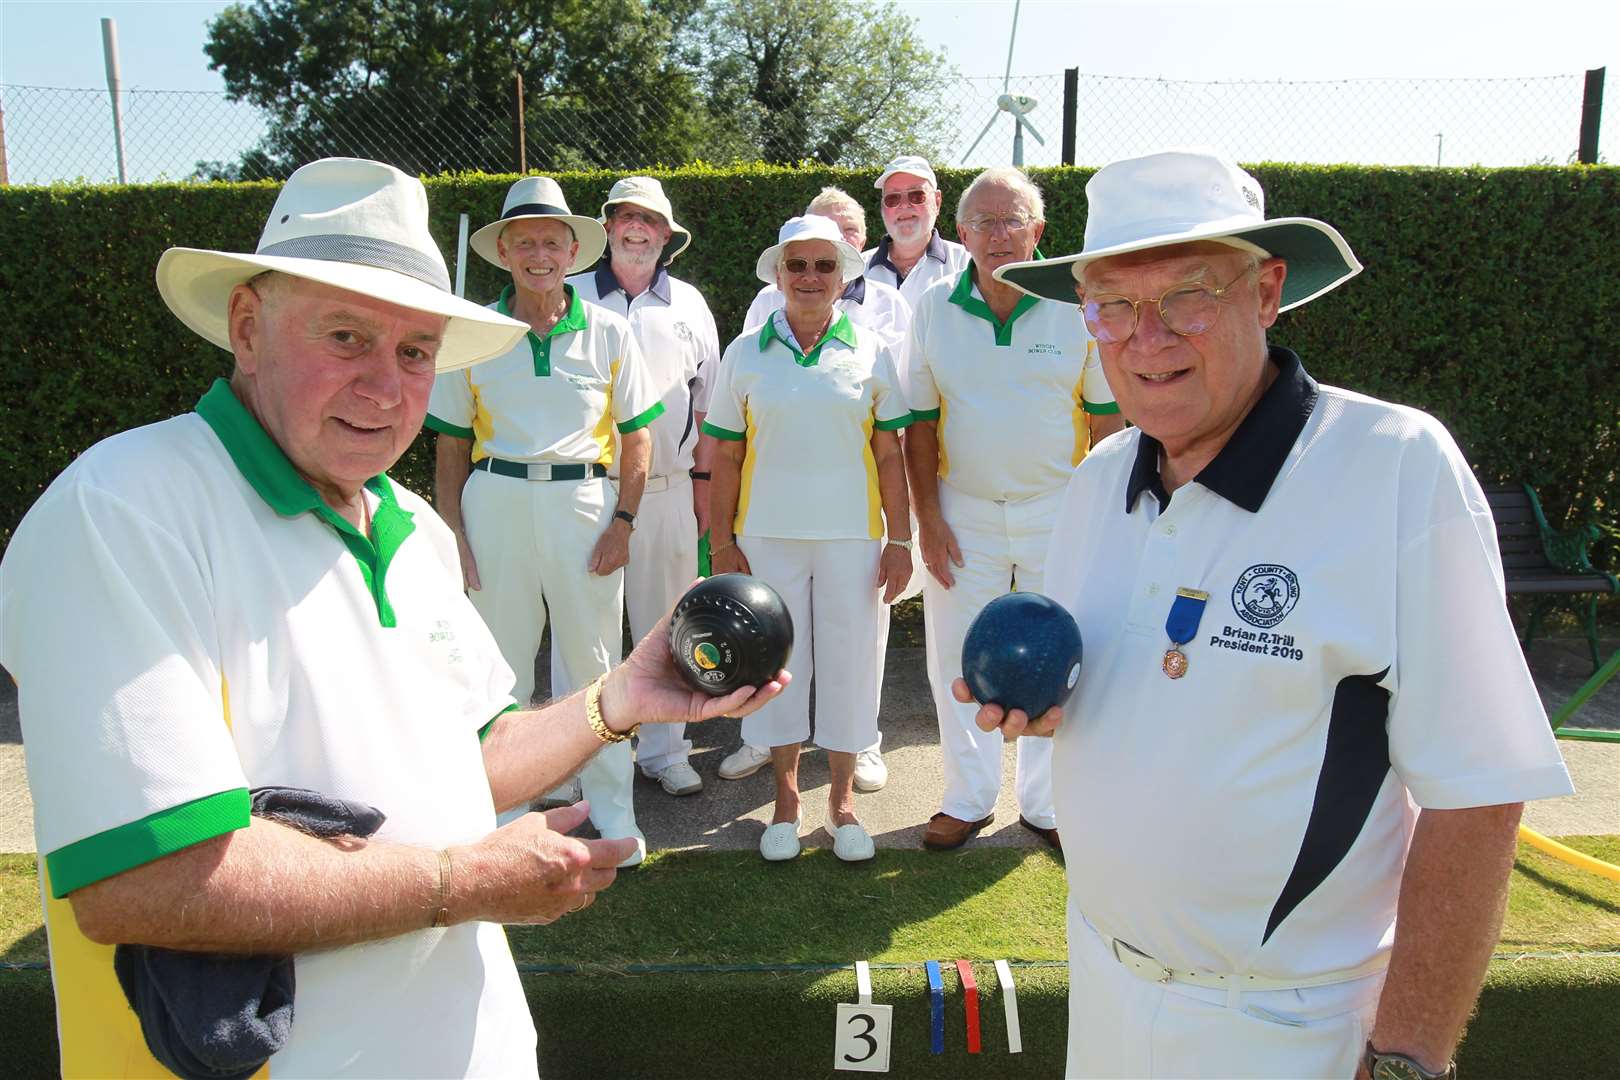 The 2019 President, Brian Trill, visits Winget Bowls Club - the 2021 President Peter Luckhurst will be making similar trips around the county this year. Picture: John Westhrop